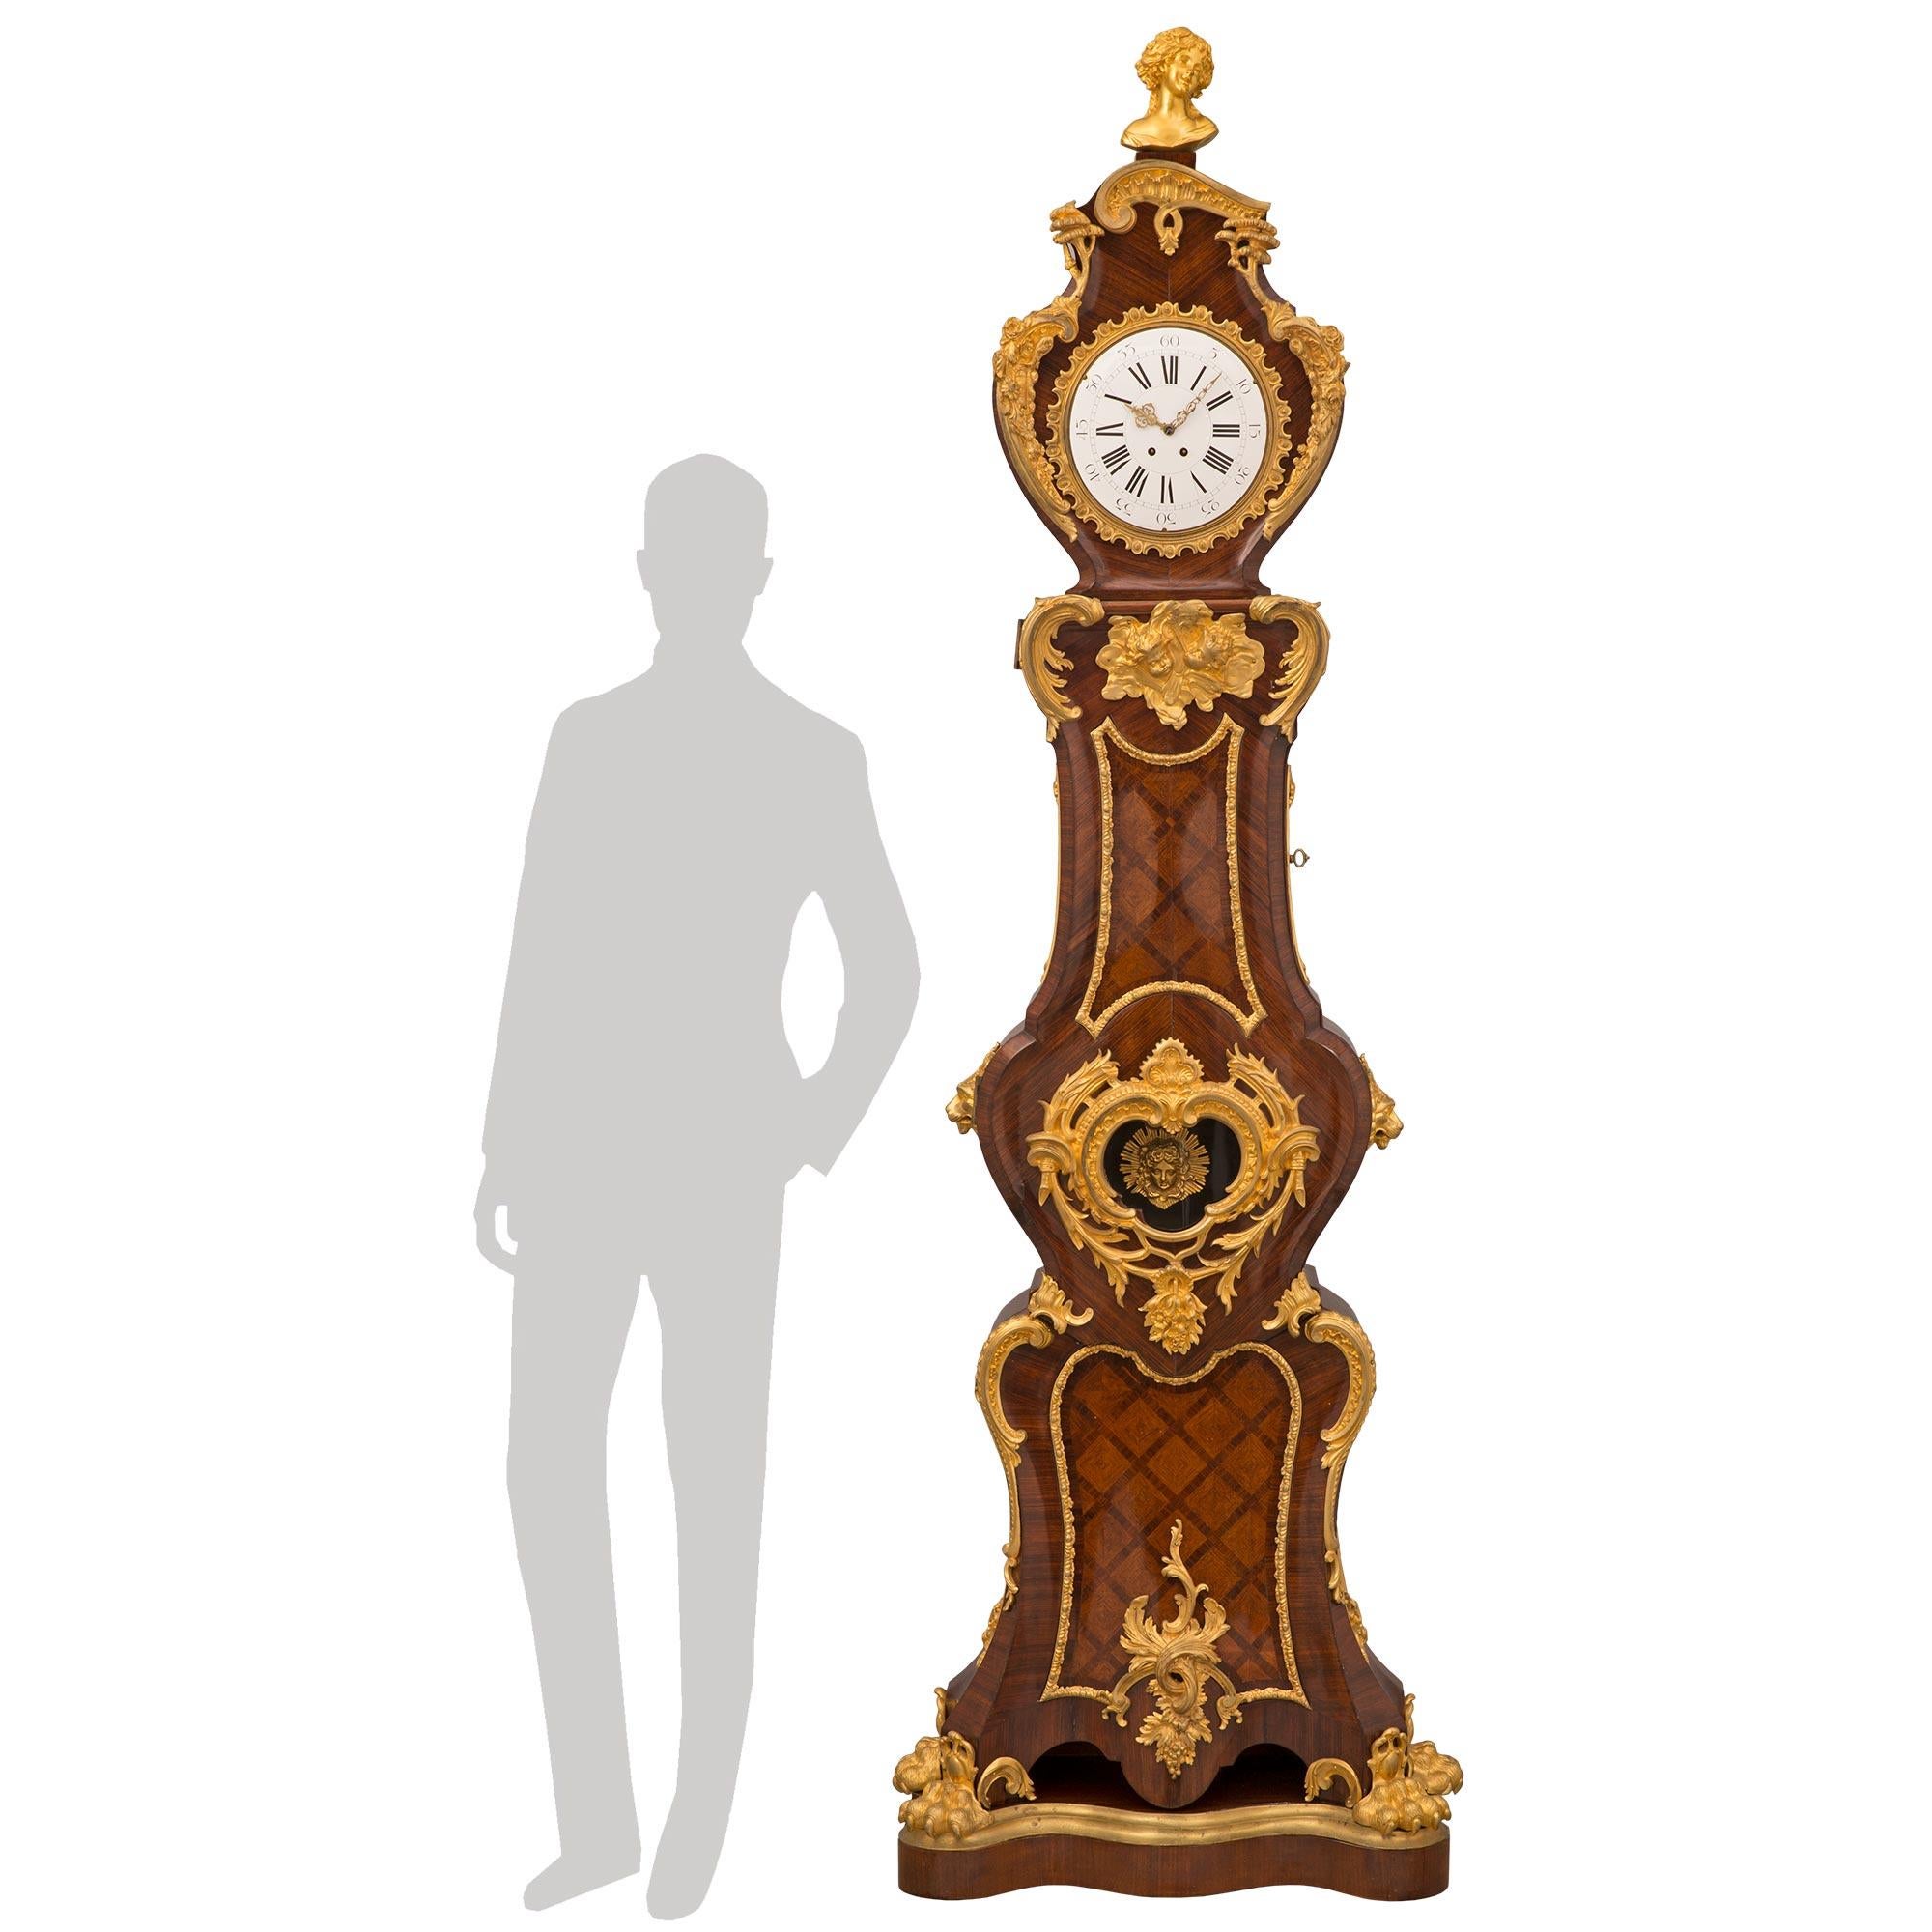 A spectacular and extremely high quality French mid-19th century Louis XV st. kingwood, tulipwood, and ormolu grandfather clock. The clock is raised by a fine scalloped shaped kingwood base with a mottled wrap around ormolu band and handsome richly